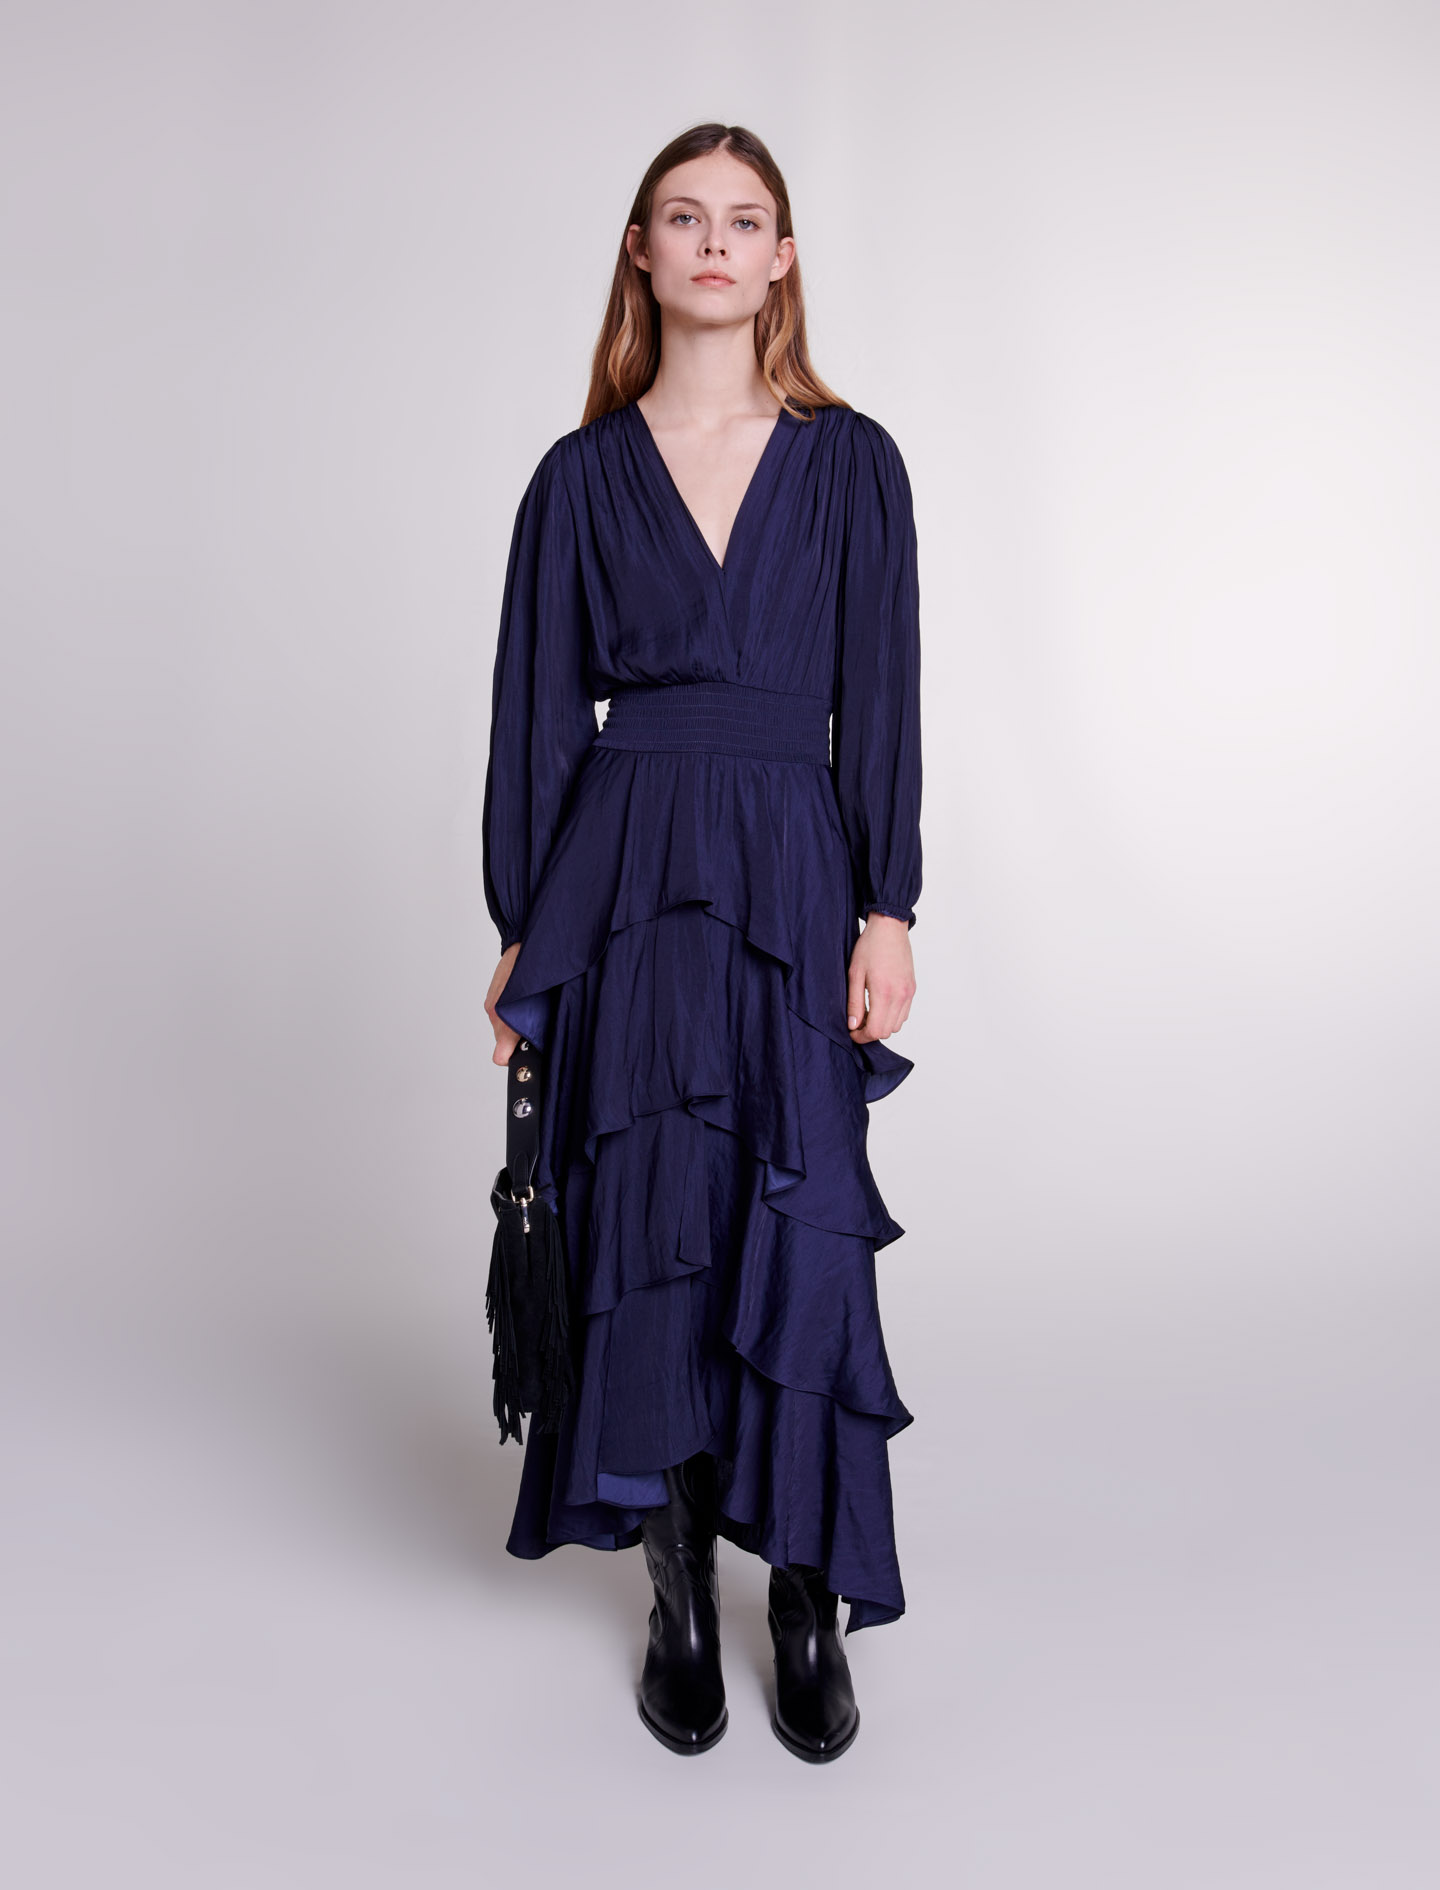 Maje Woman's polyester Ruffled maxi dress for Fall/Winter, in color Navy / Blue